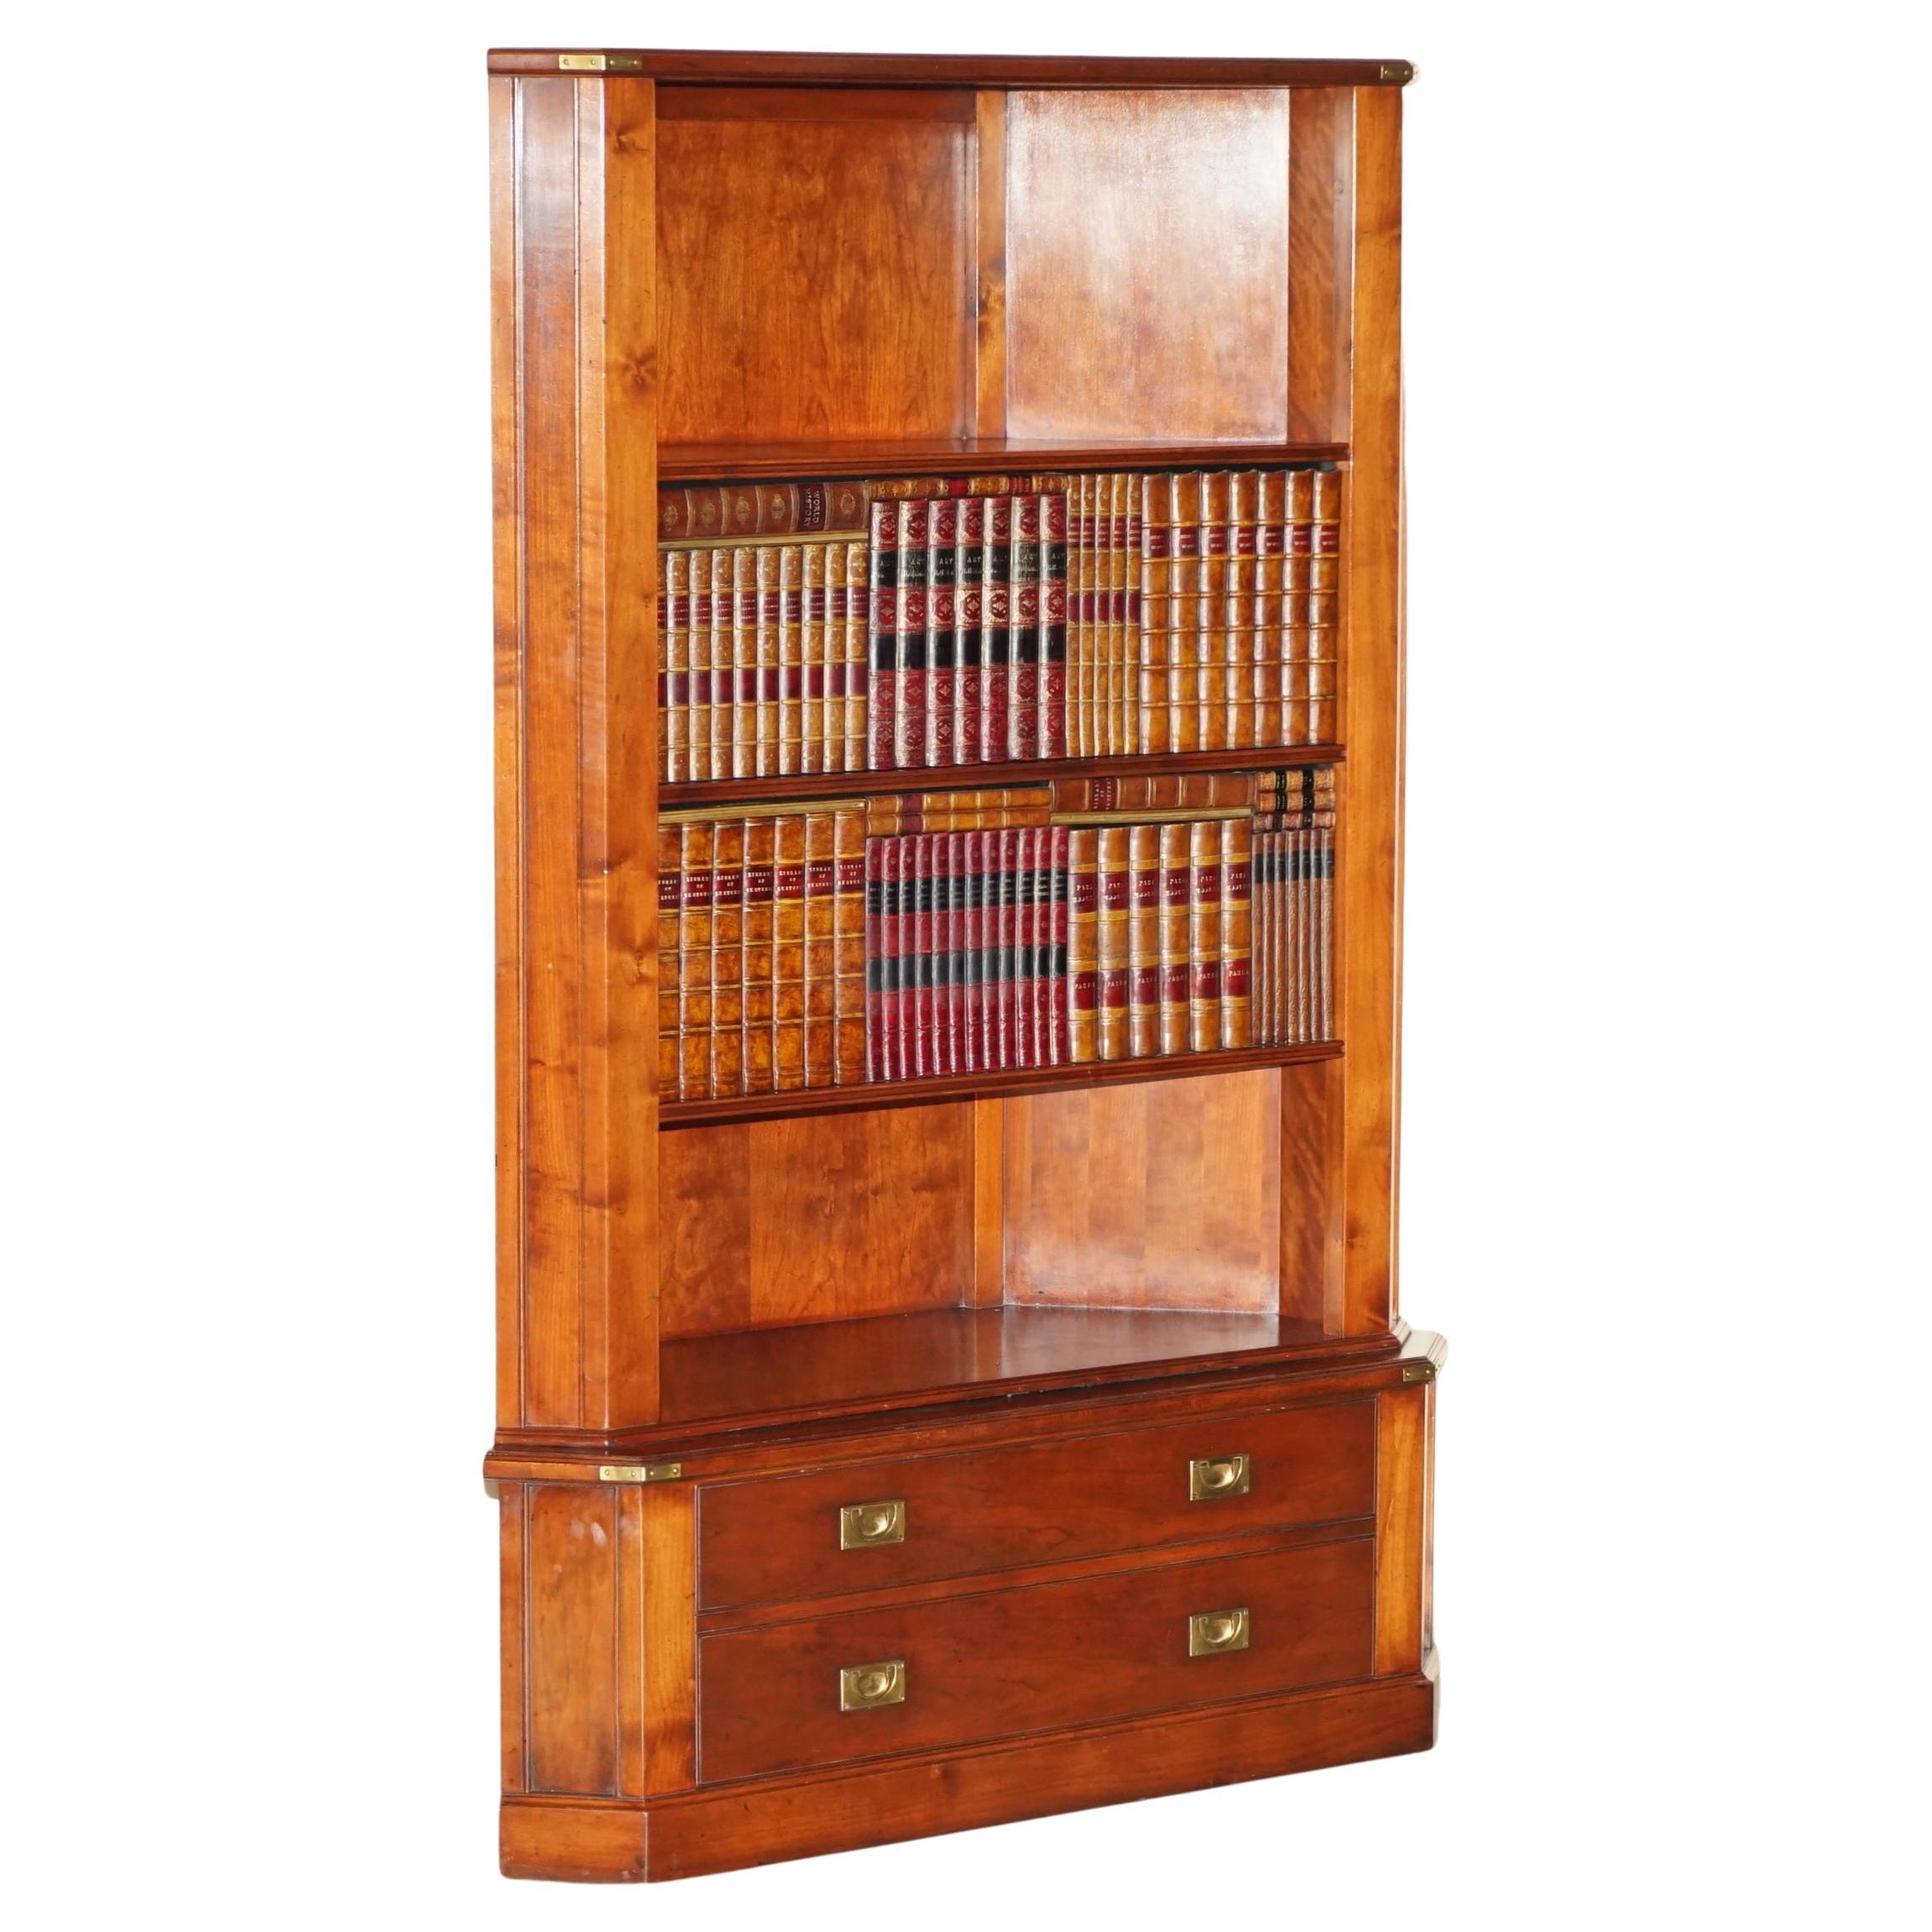 1 of 2 Harrods London Kennedy Hardwood Bookcase Home Bar Cabinet Faux Books For Sale